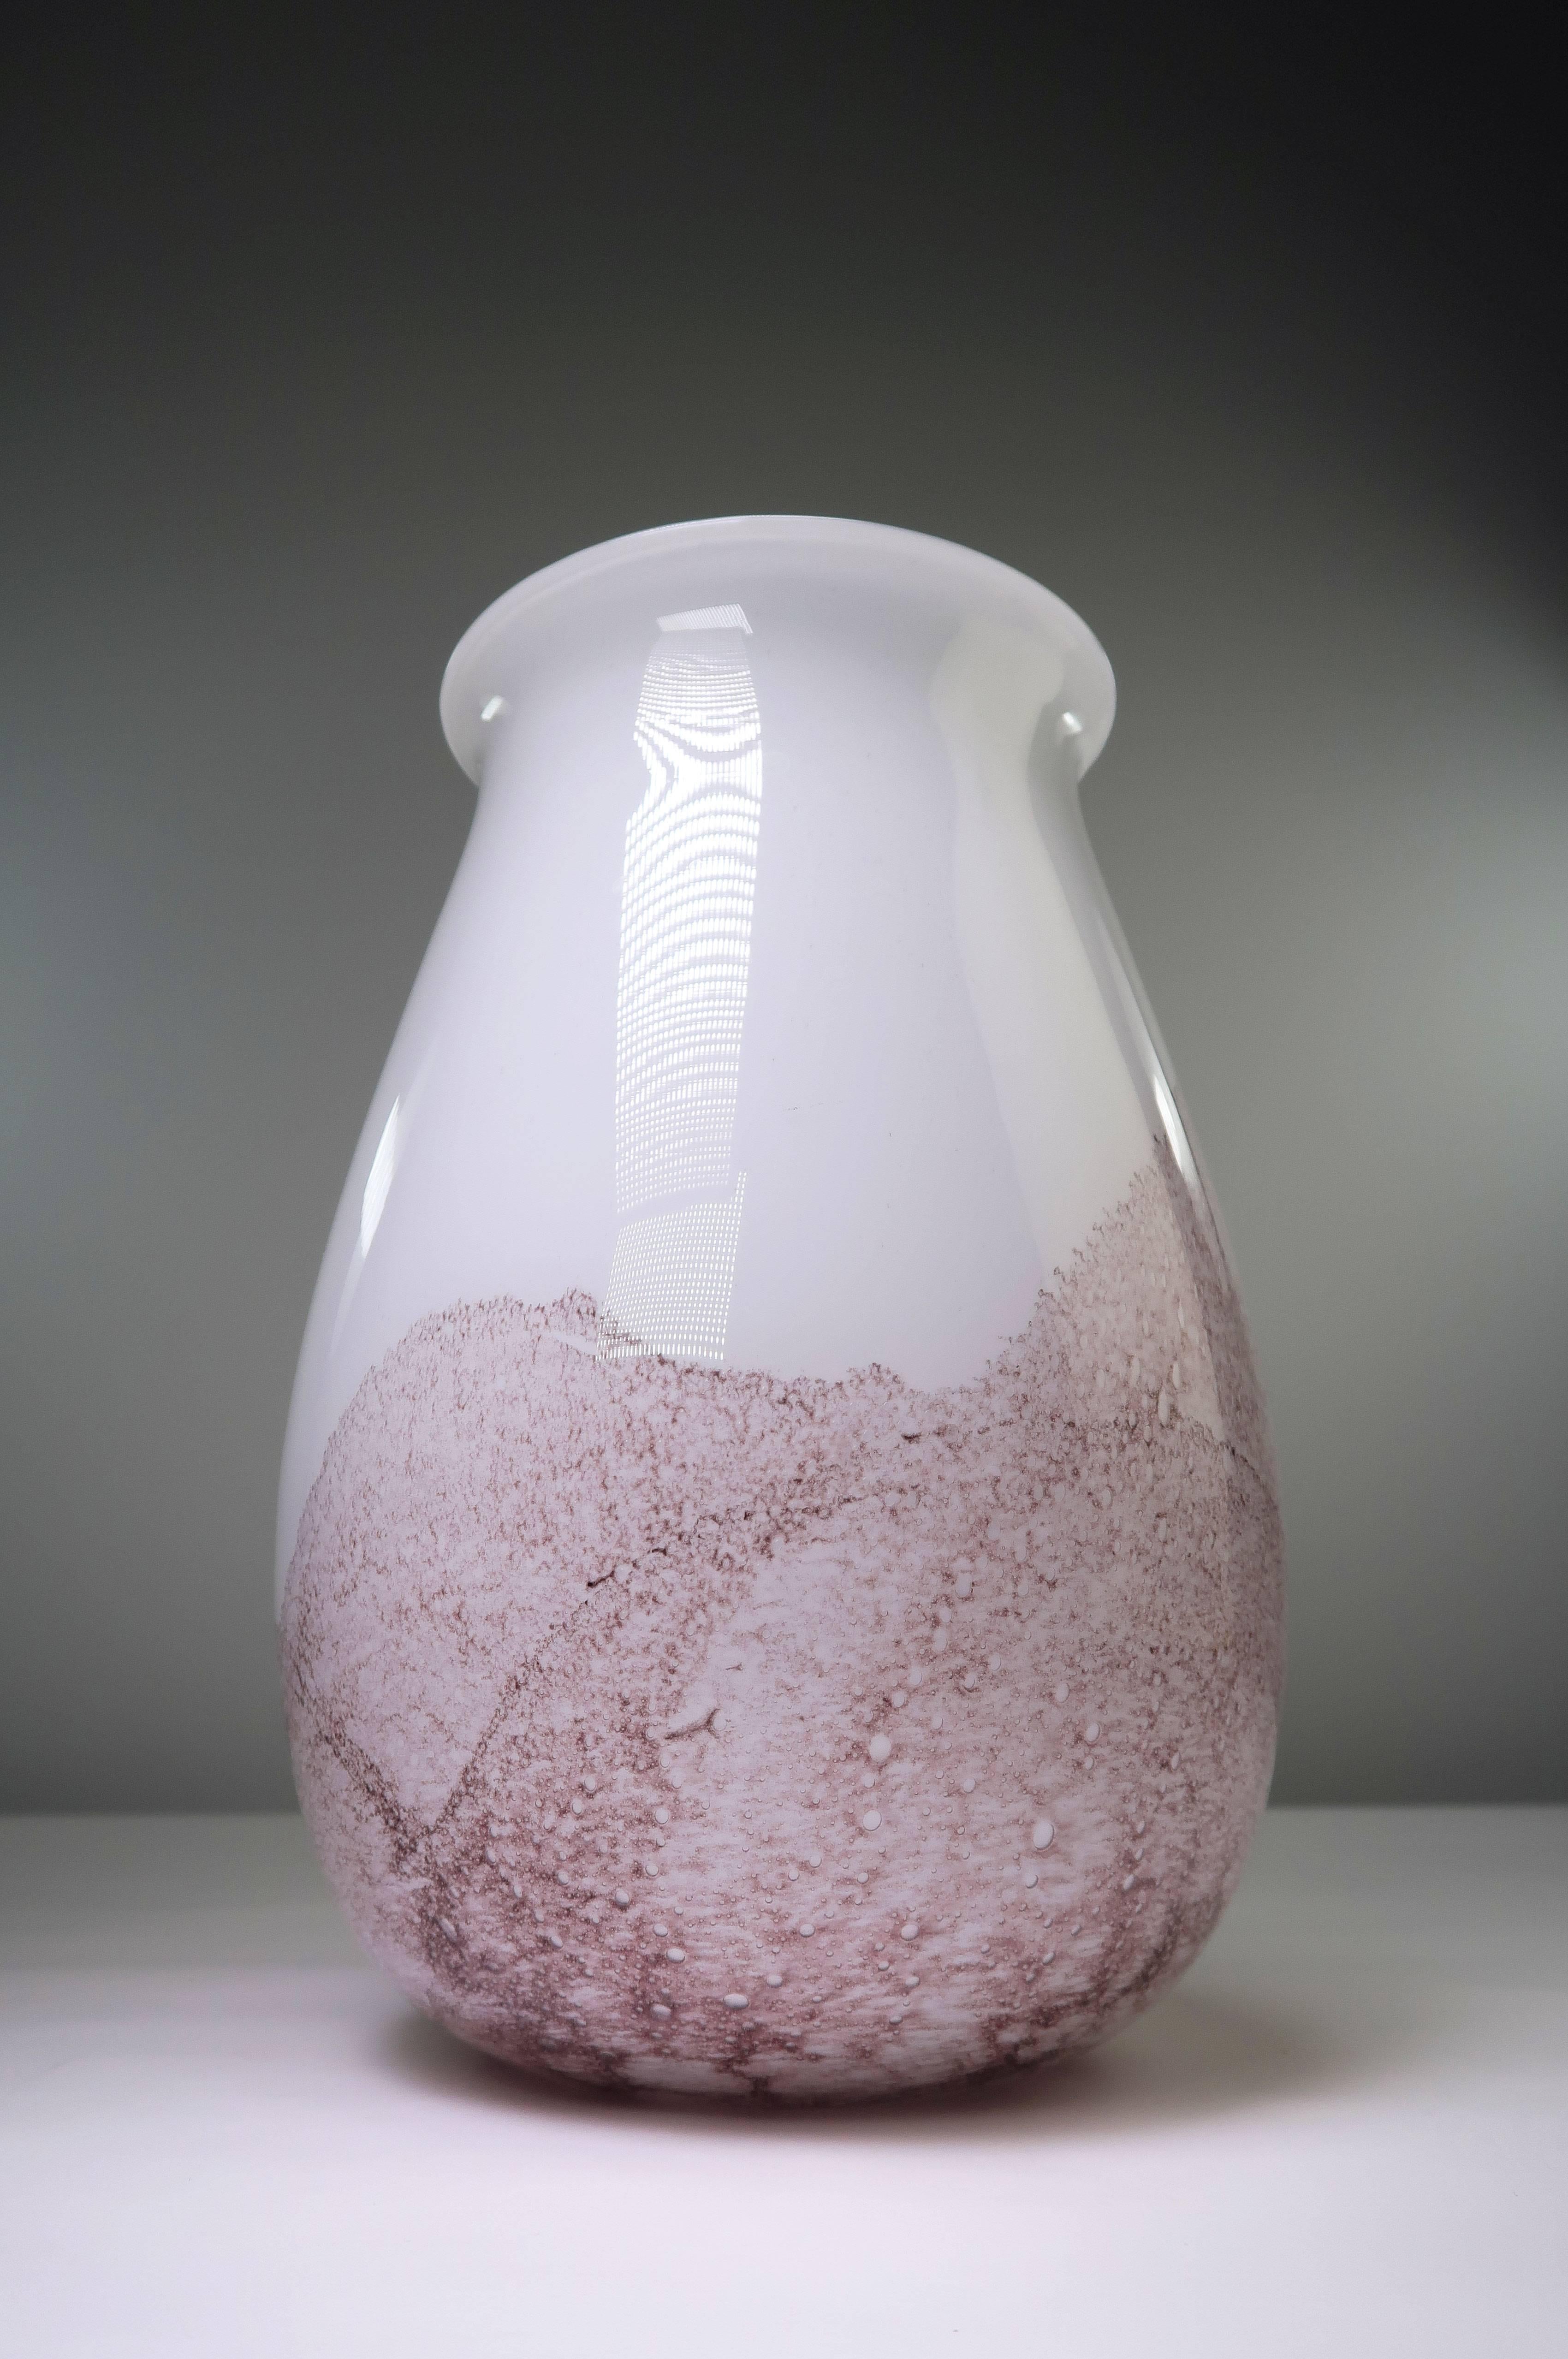 Danish modern mouth blown art glass vase with mulberry colored bubbly landscape like pattern on opaline white glass. Manufactured by Danish glassworks Holmegaard in the 1960s. Excellent, seemingly nused condition.
Denmark, 1960s. 

The history of